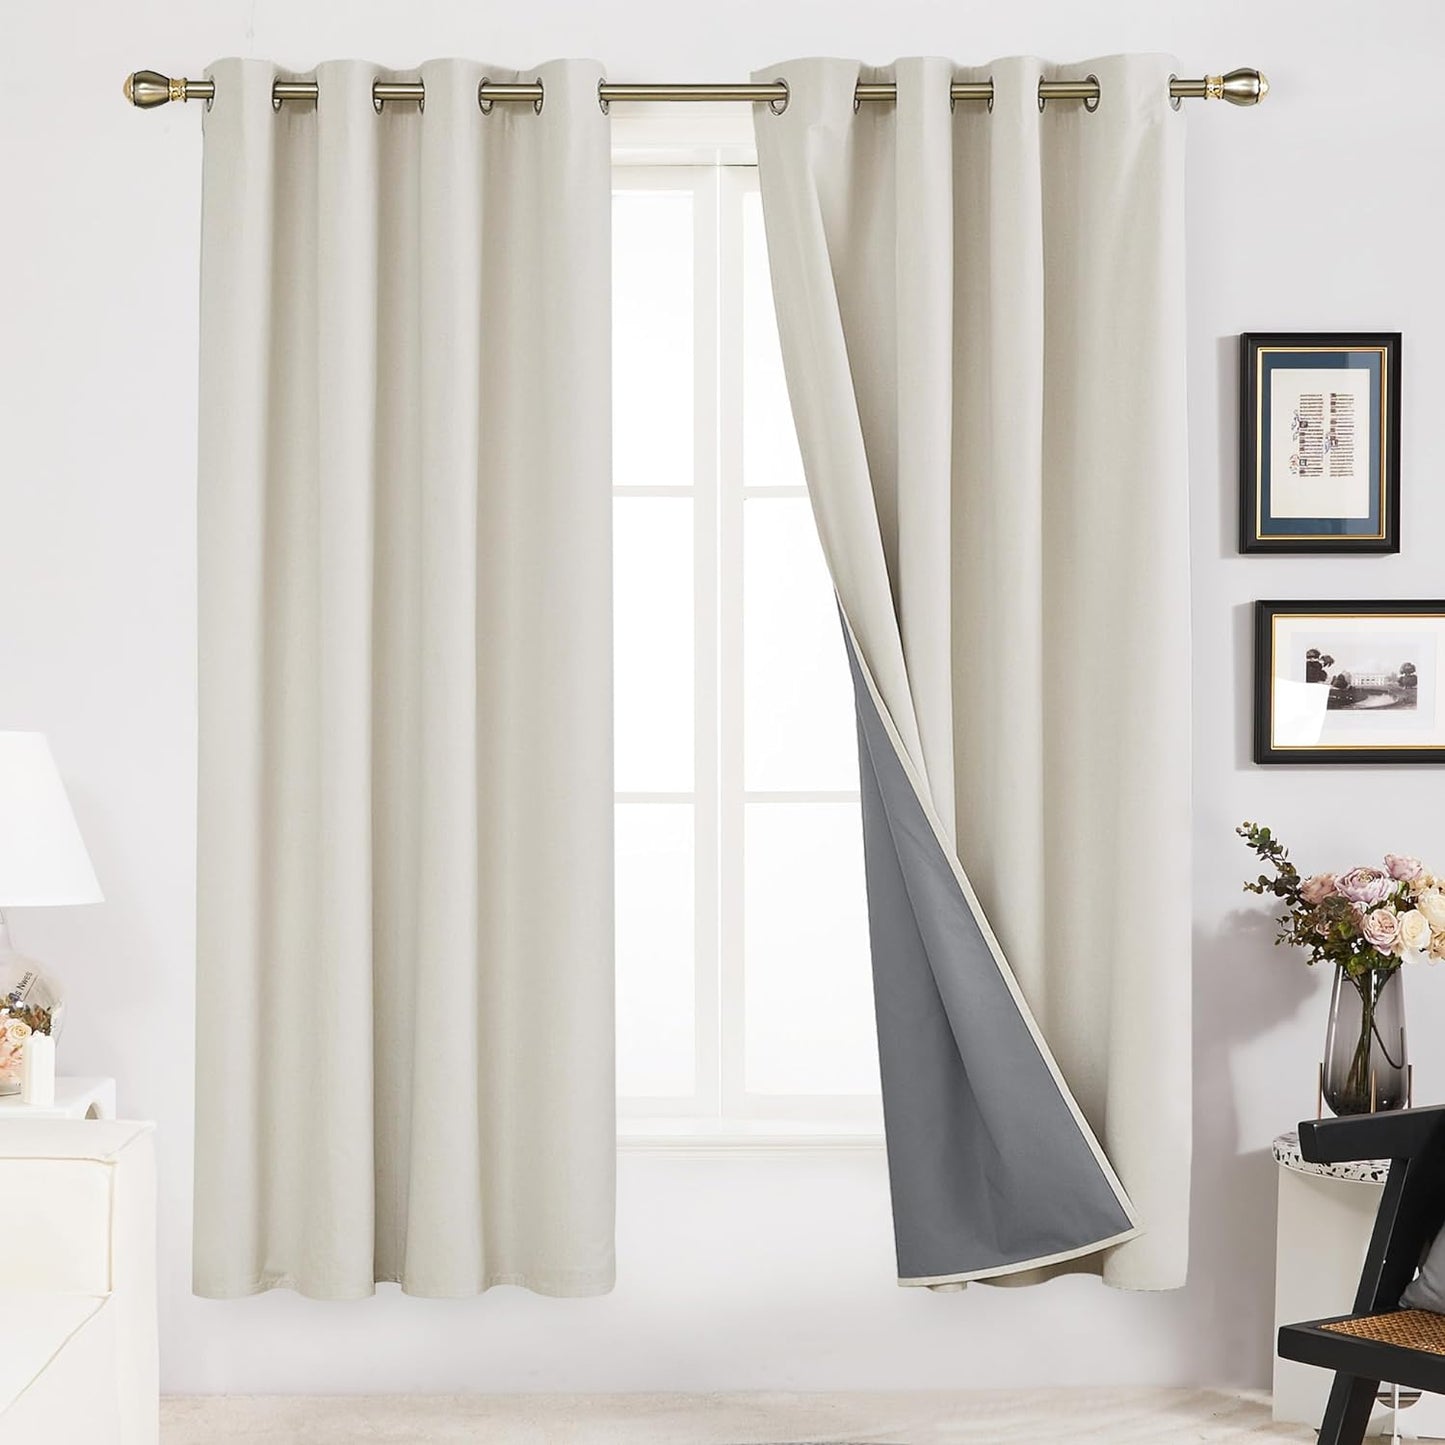 Deconovo Linen Blackout Curtains 84 Inch Length Set of 2, Thermal Curtain Drapes with Grey Coating, Total Light Blocking Waterproof Curtains for Indoor/Outdoor (Light Grey, 52W X 84L Inch)  Deconovo Cream 52X72 Inches 